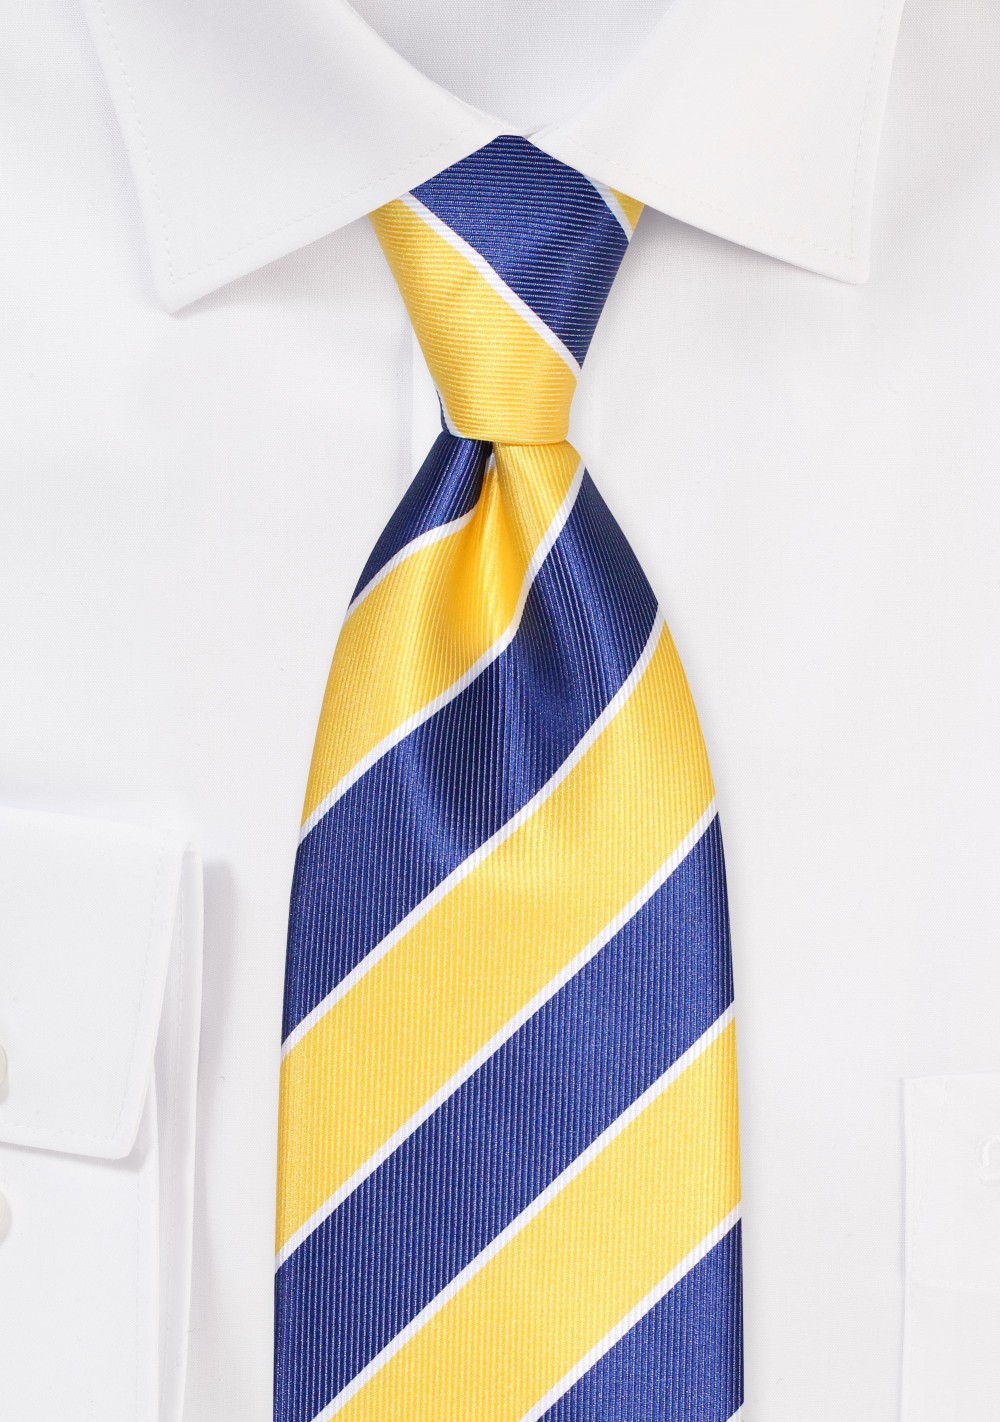 Regimental Stripes in Golden Yellow and Navy